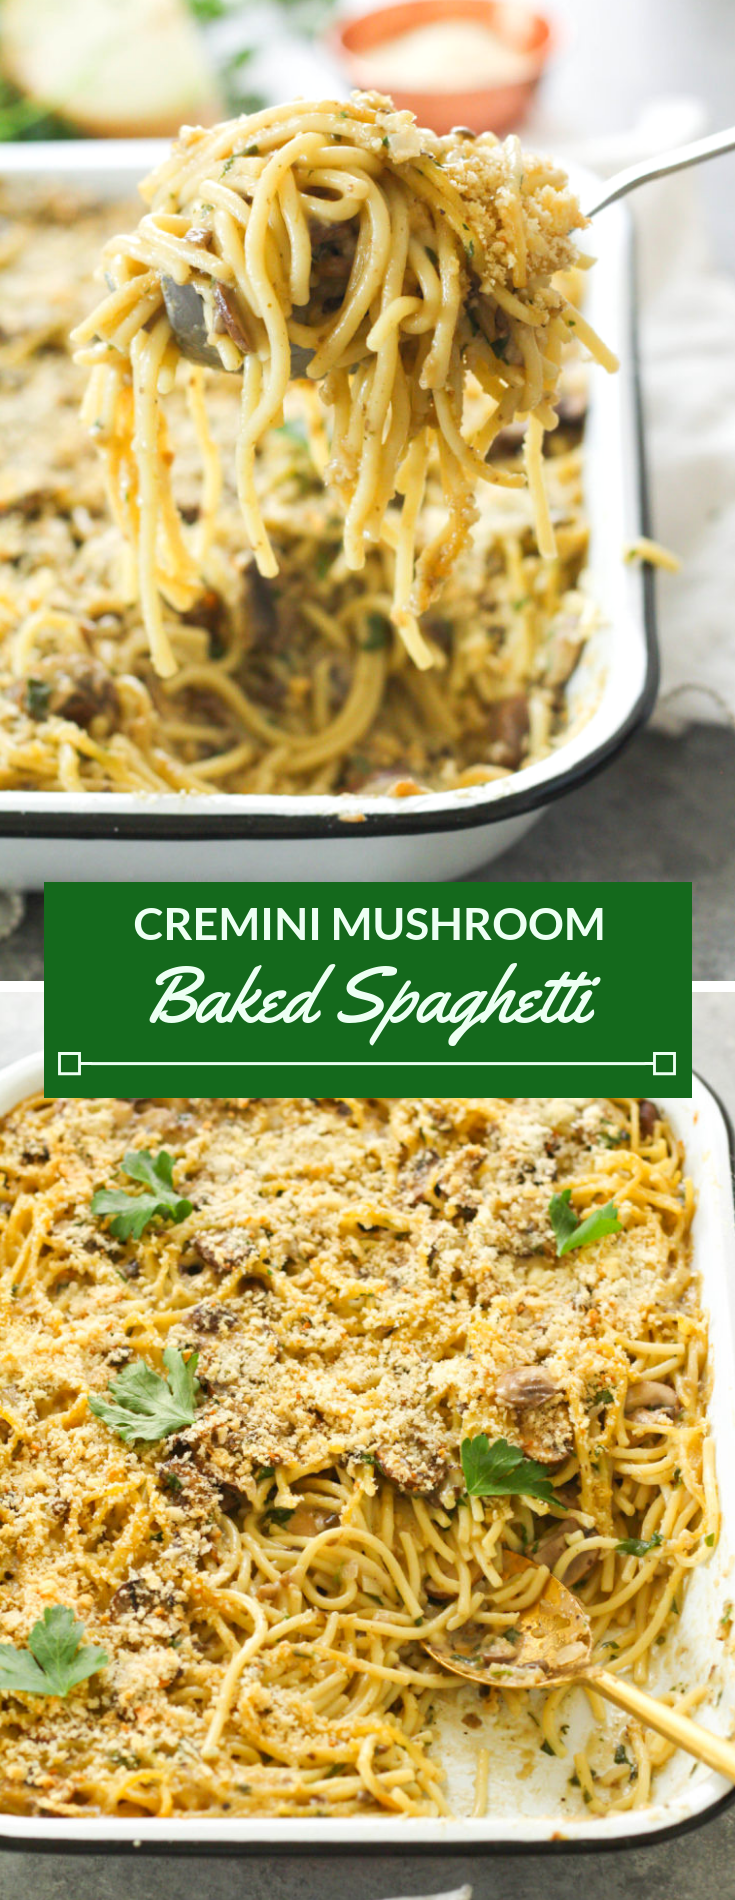 A comforting baked spaghetti dish with a creamy mushroom sauce, loaded with savory fresh mushrooms and herbs, tender spaghetti noodles and topped with cheesy and crunchy panko breadcrumbs.